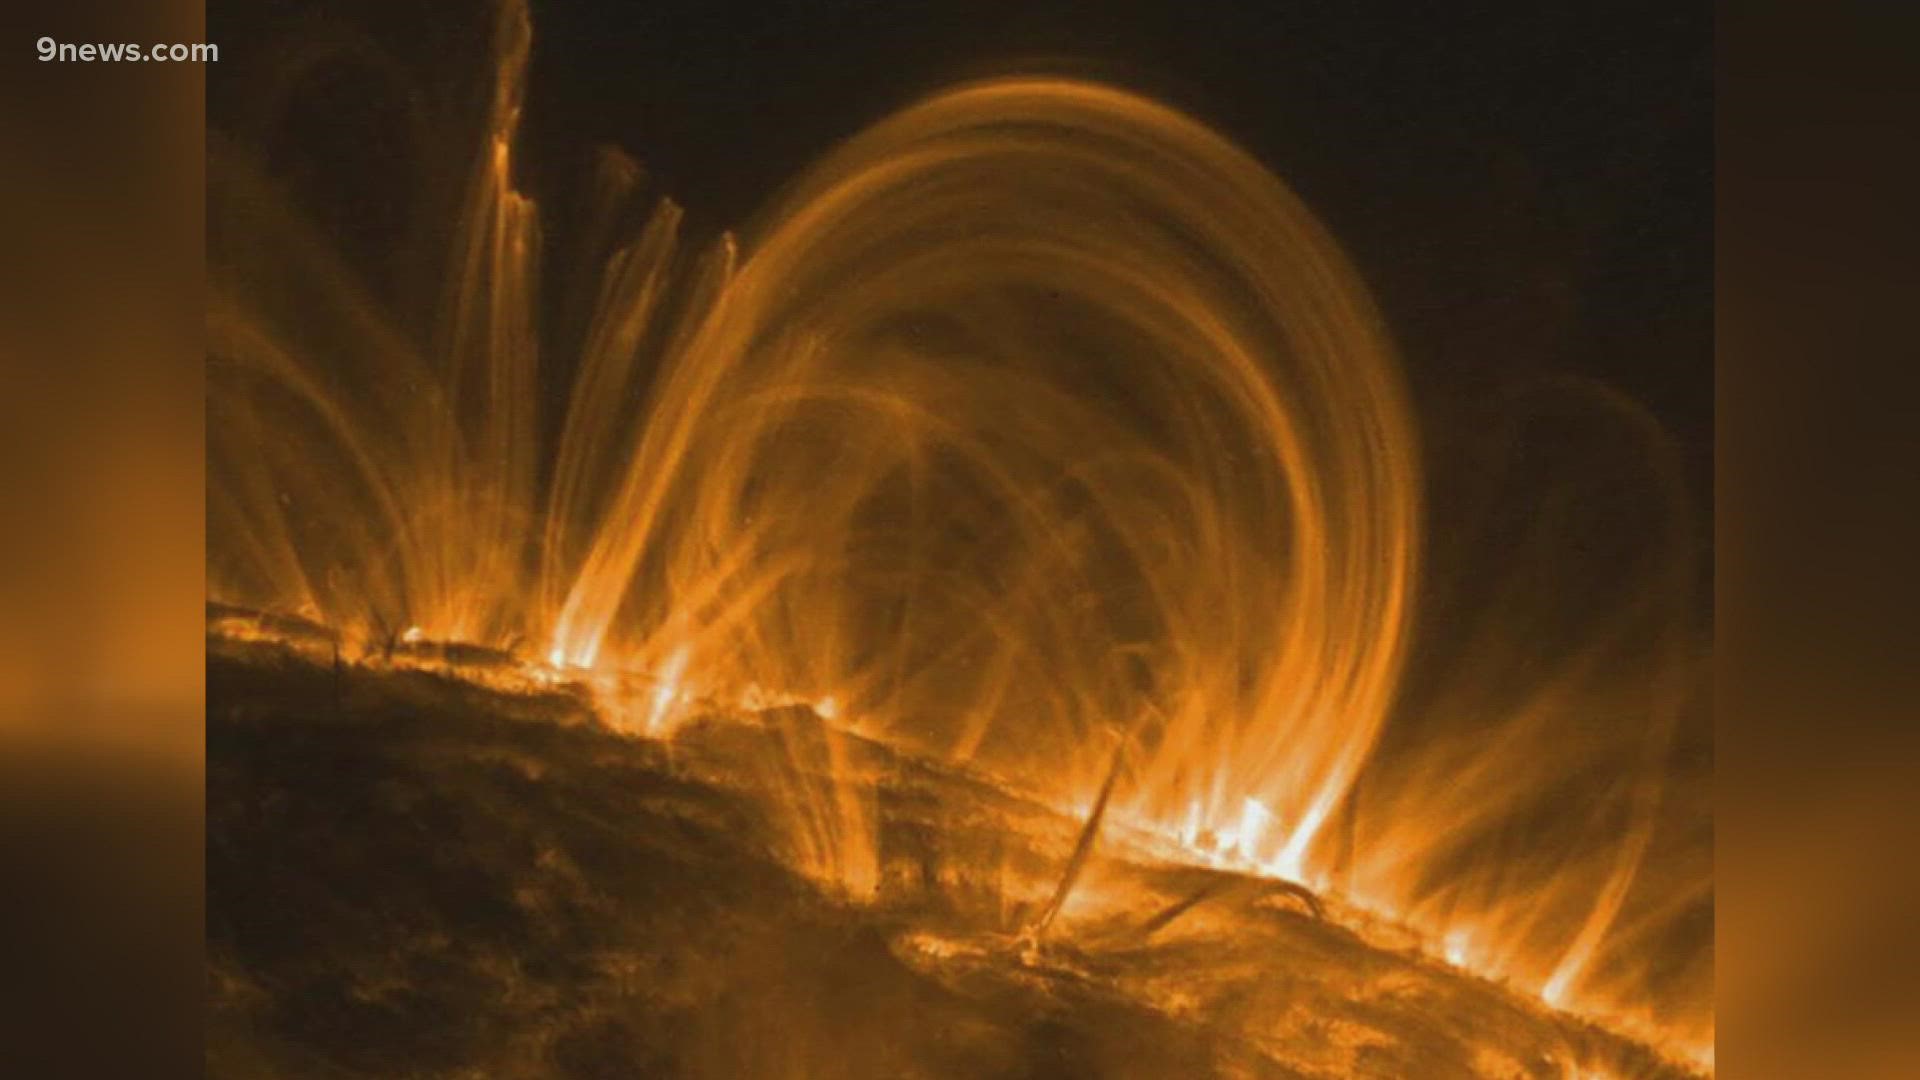 A new study from NCAR in Boulder challenges long-held assumptions about how the atmosphere of the sun is structured.